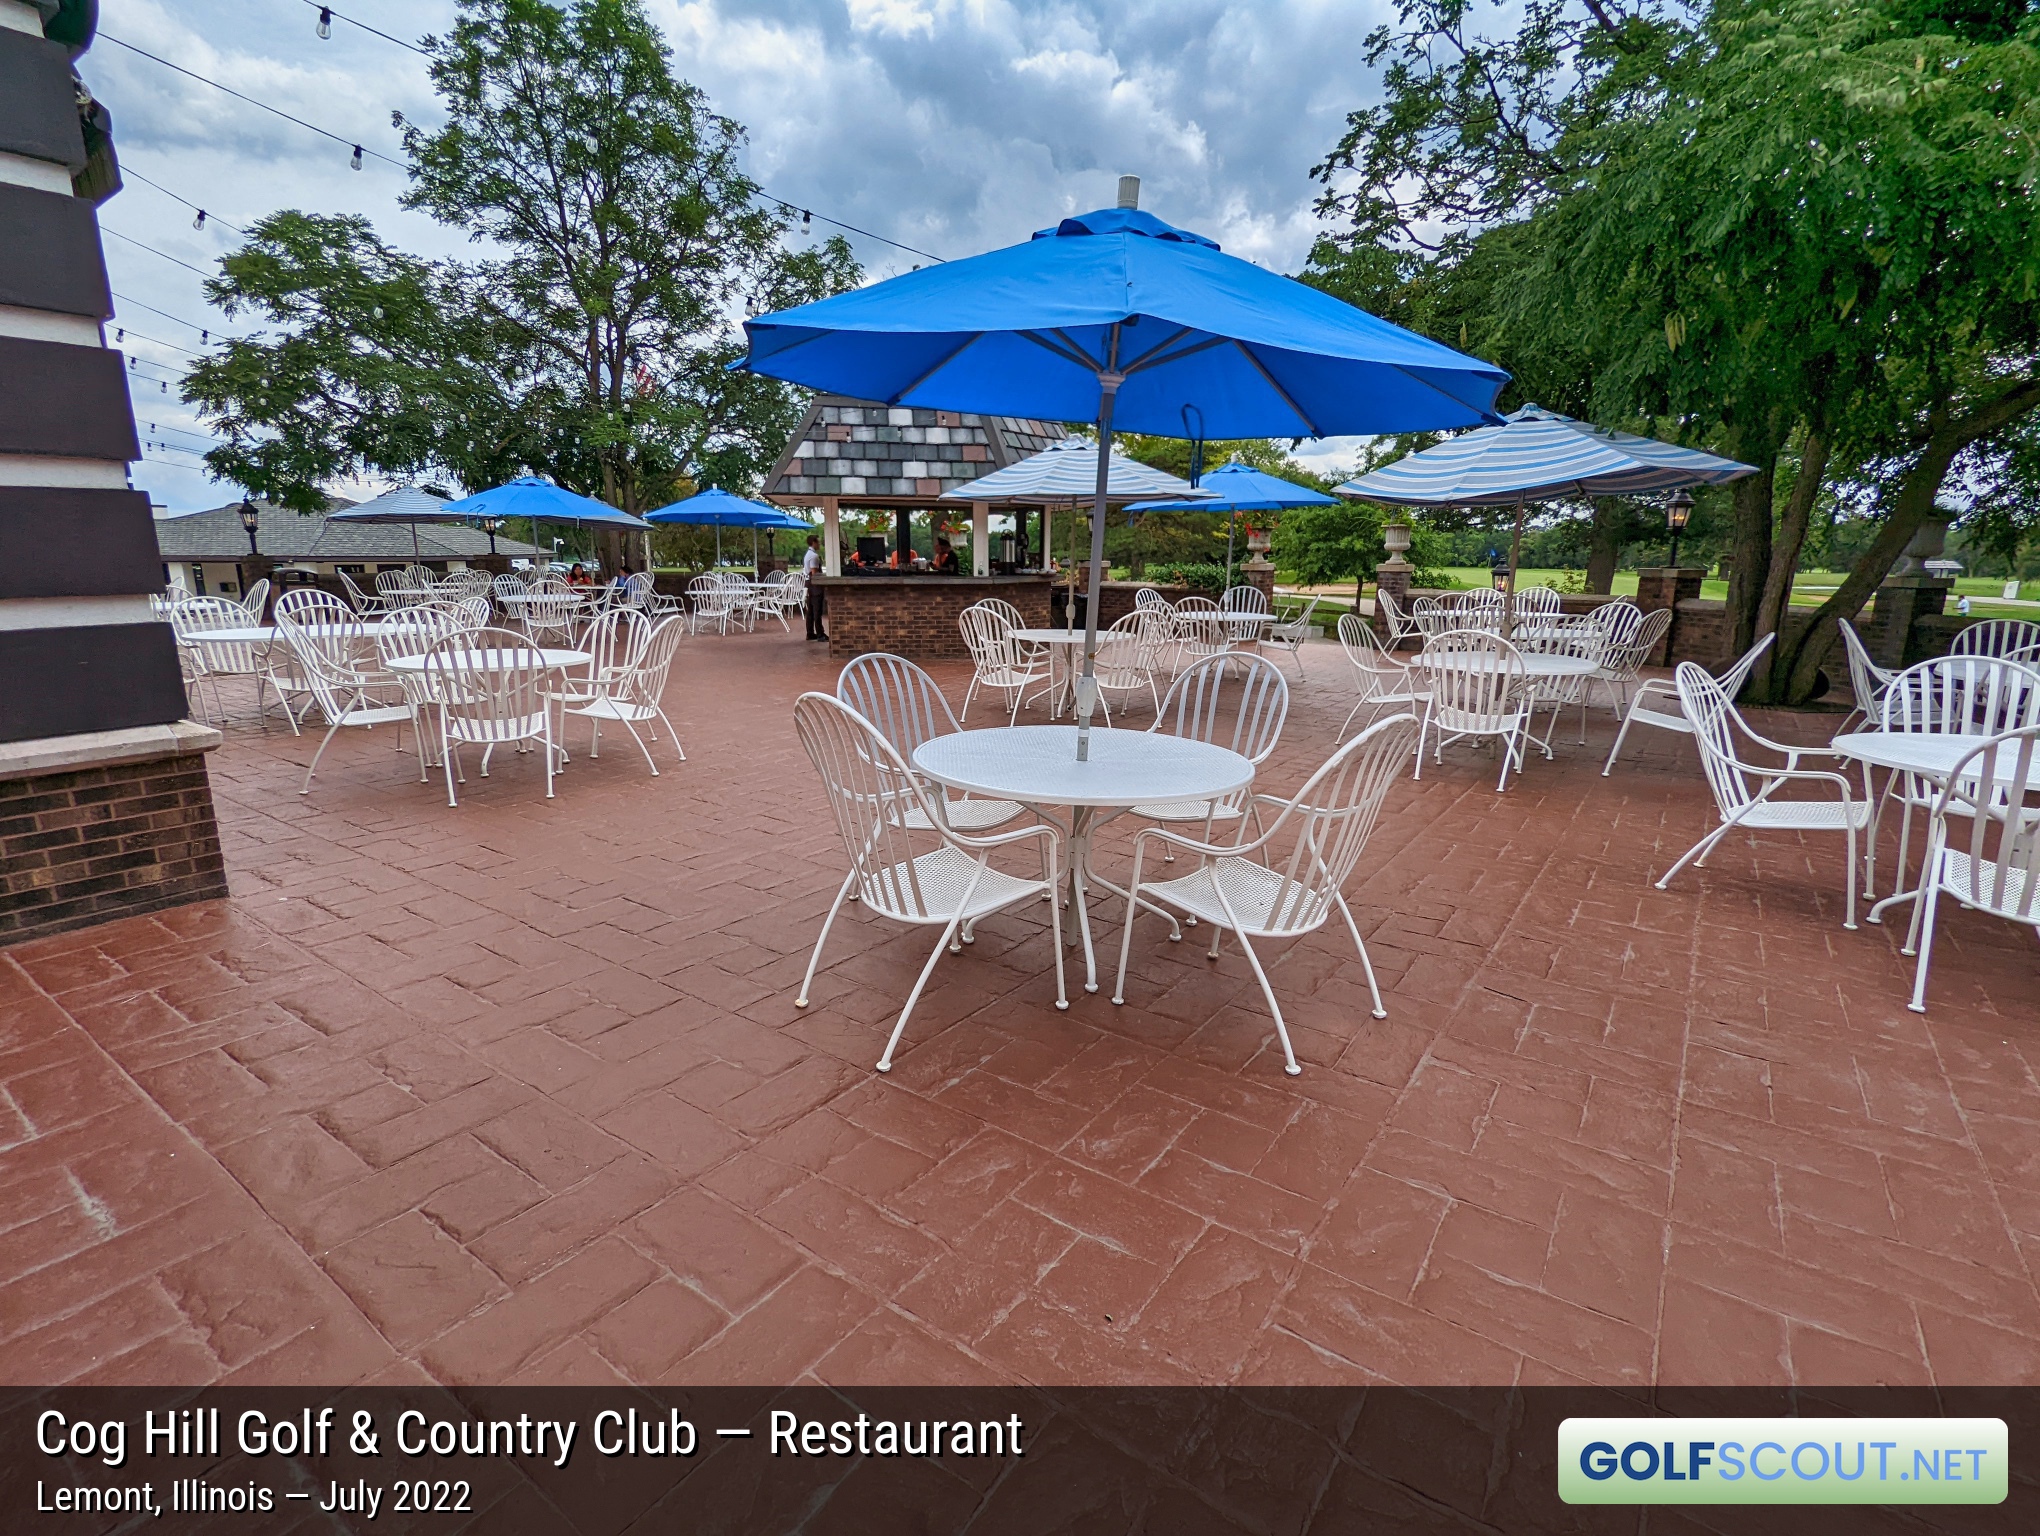 Photo of the restaurant at Cog Hill Course #1 in Lemont, Illinois. The outdoor patio.